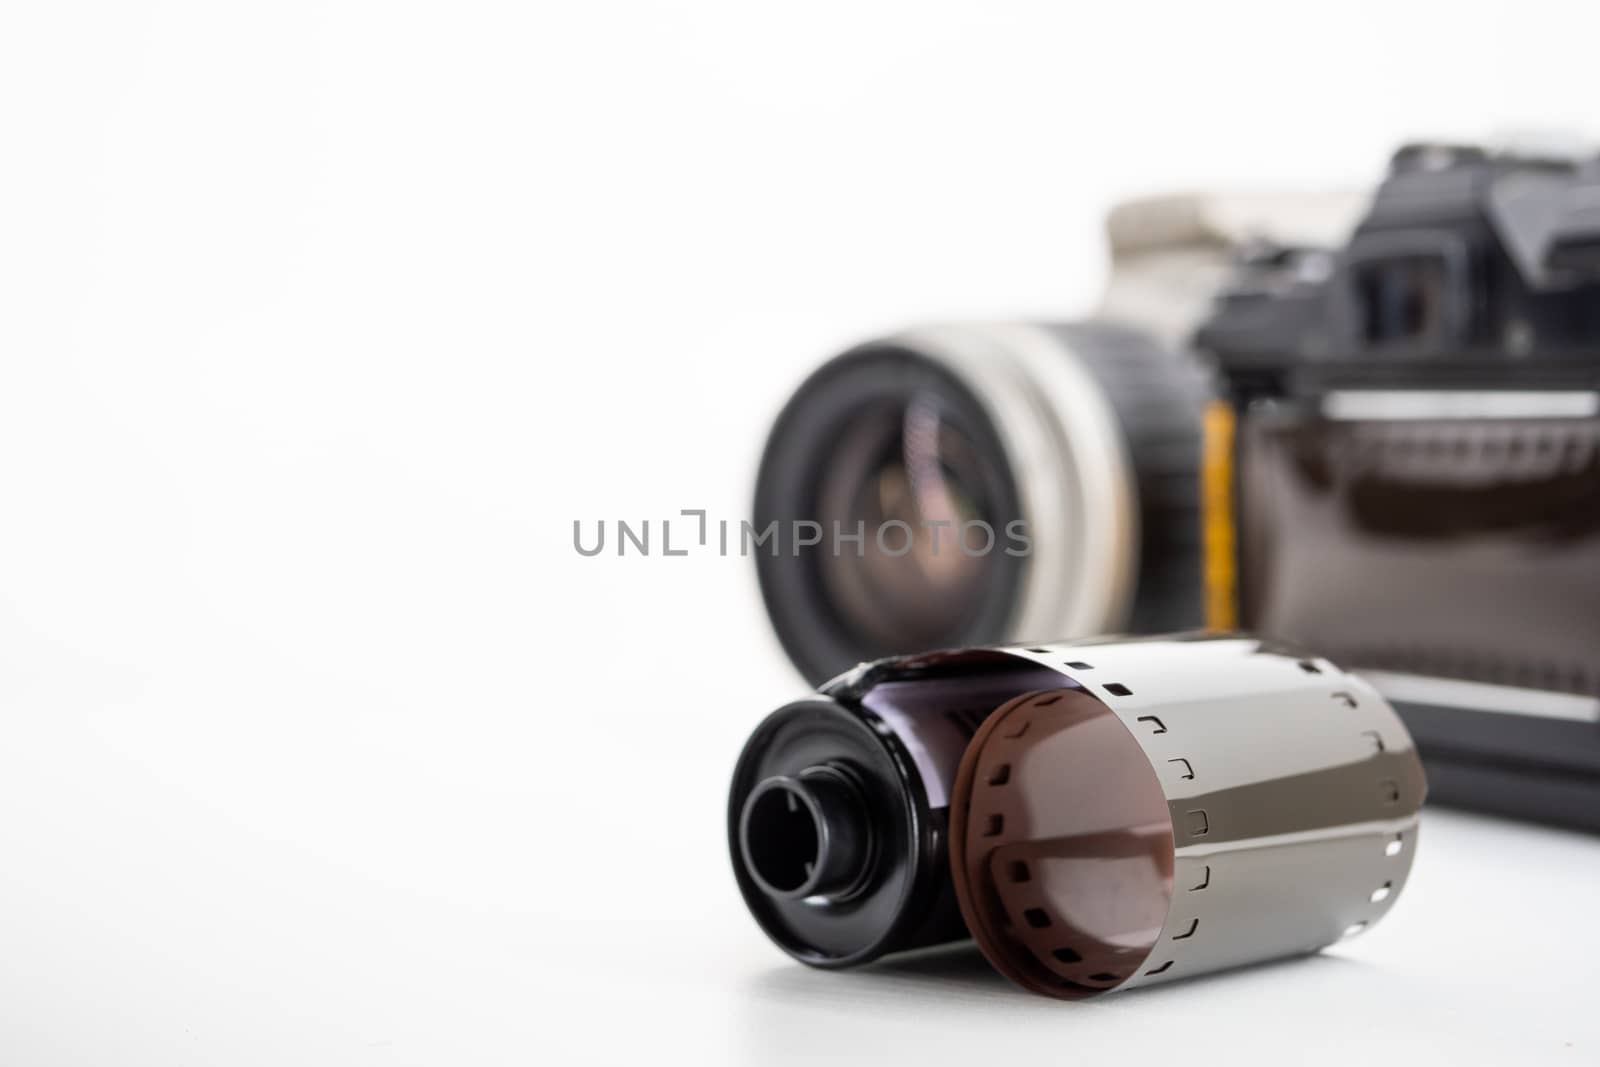 Single lens reflex cameras and film rolls on a white background. by ronnarong